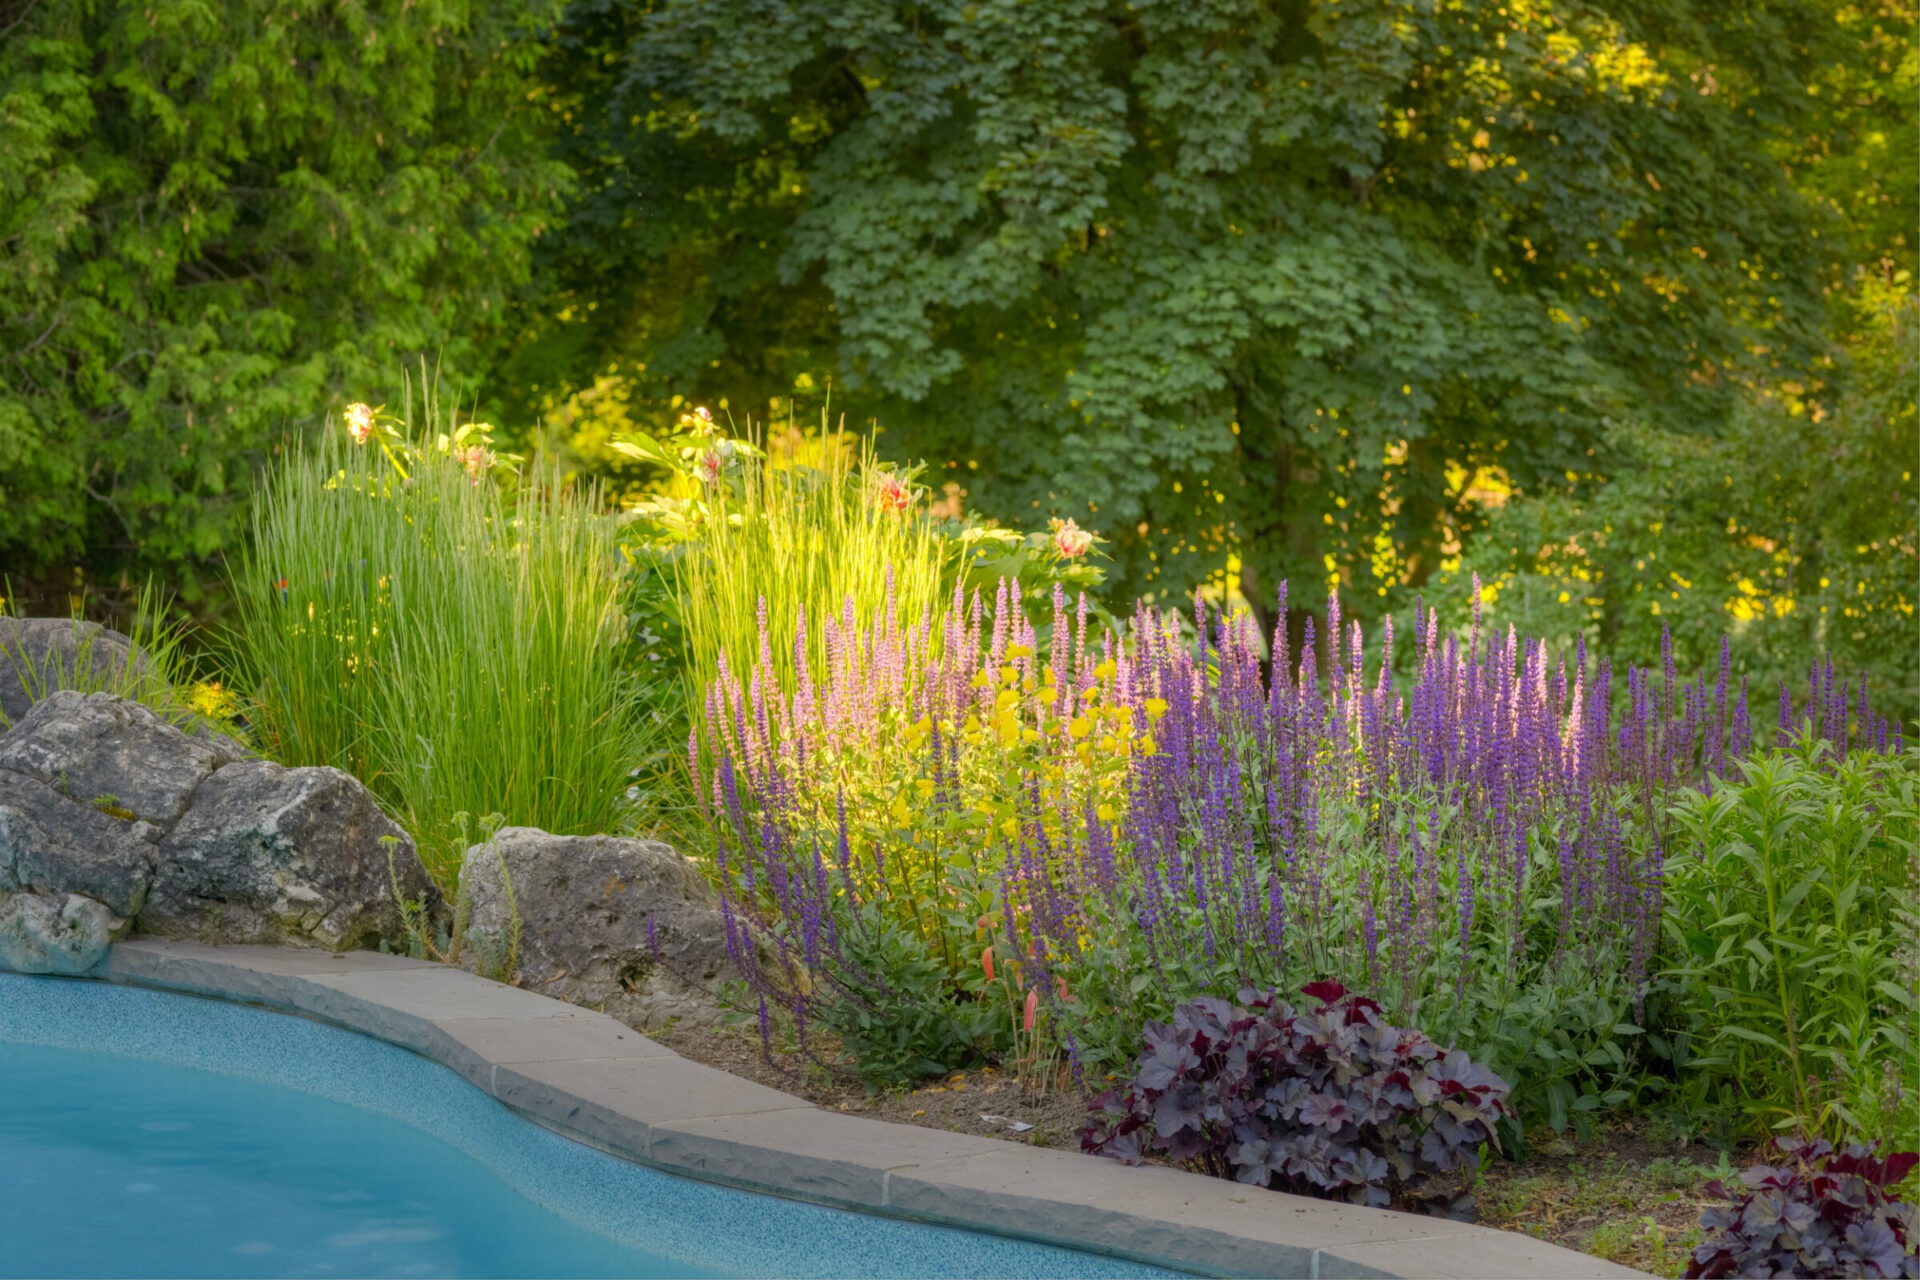 A serene garden with vibrant purple flowers, lush greenery, a stone border, and a glimpse of a tranquil blue pool under soft sunlight.